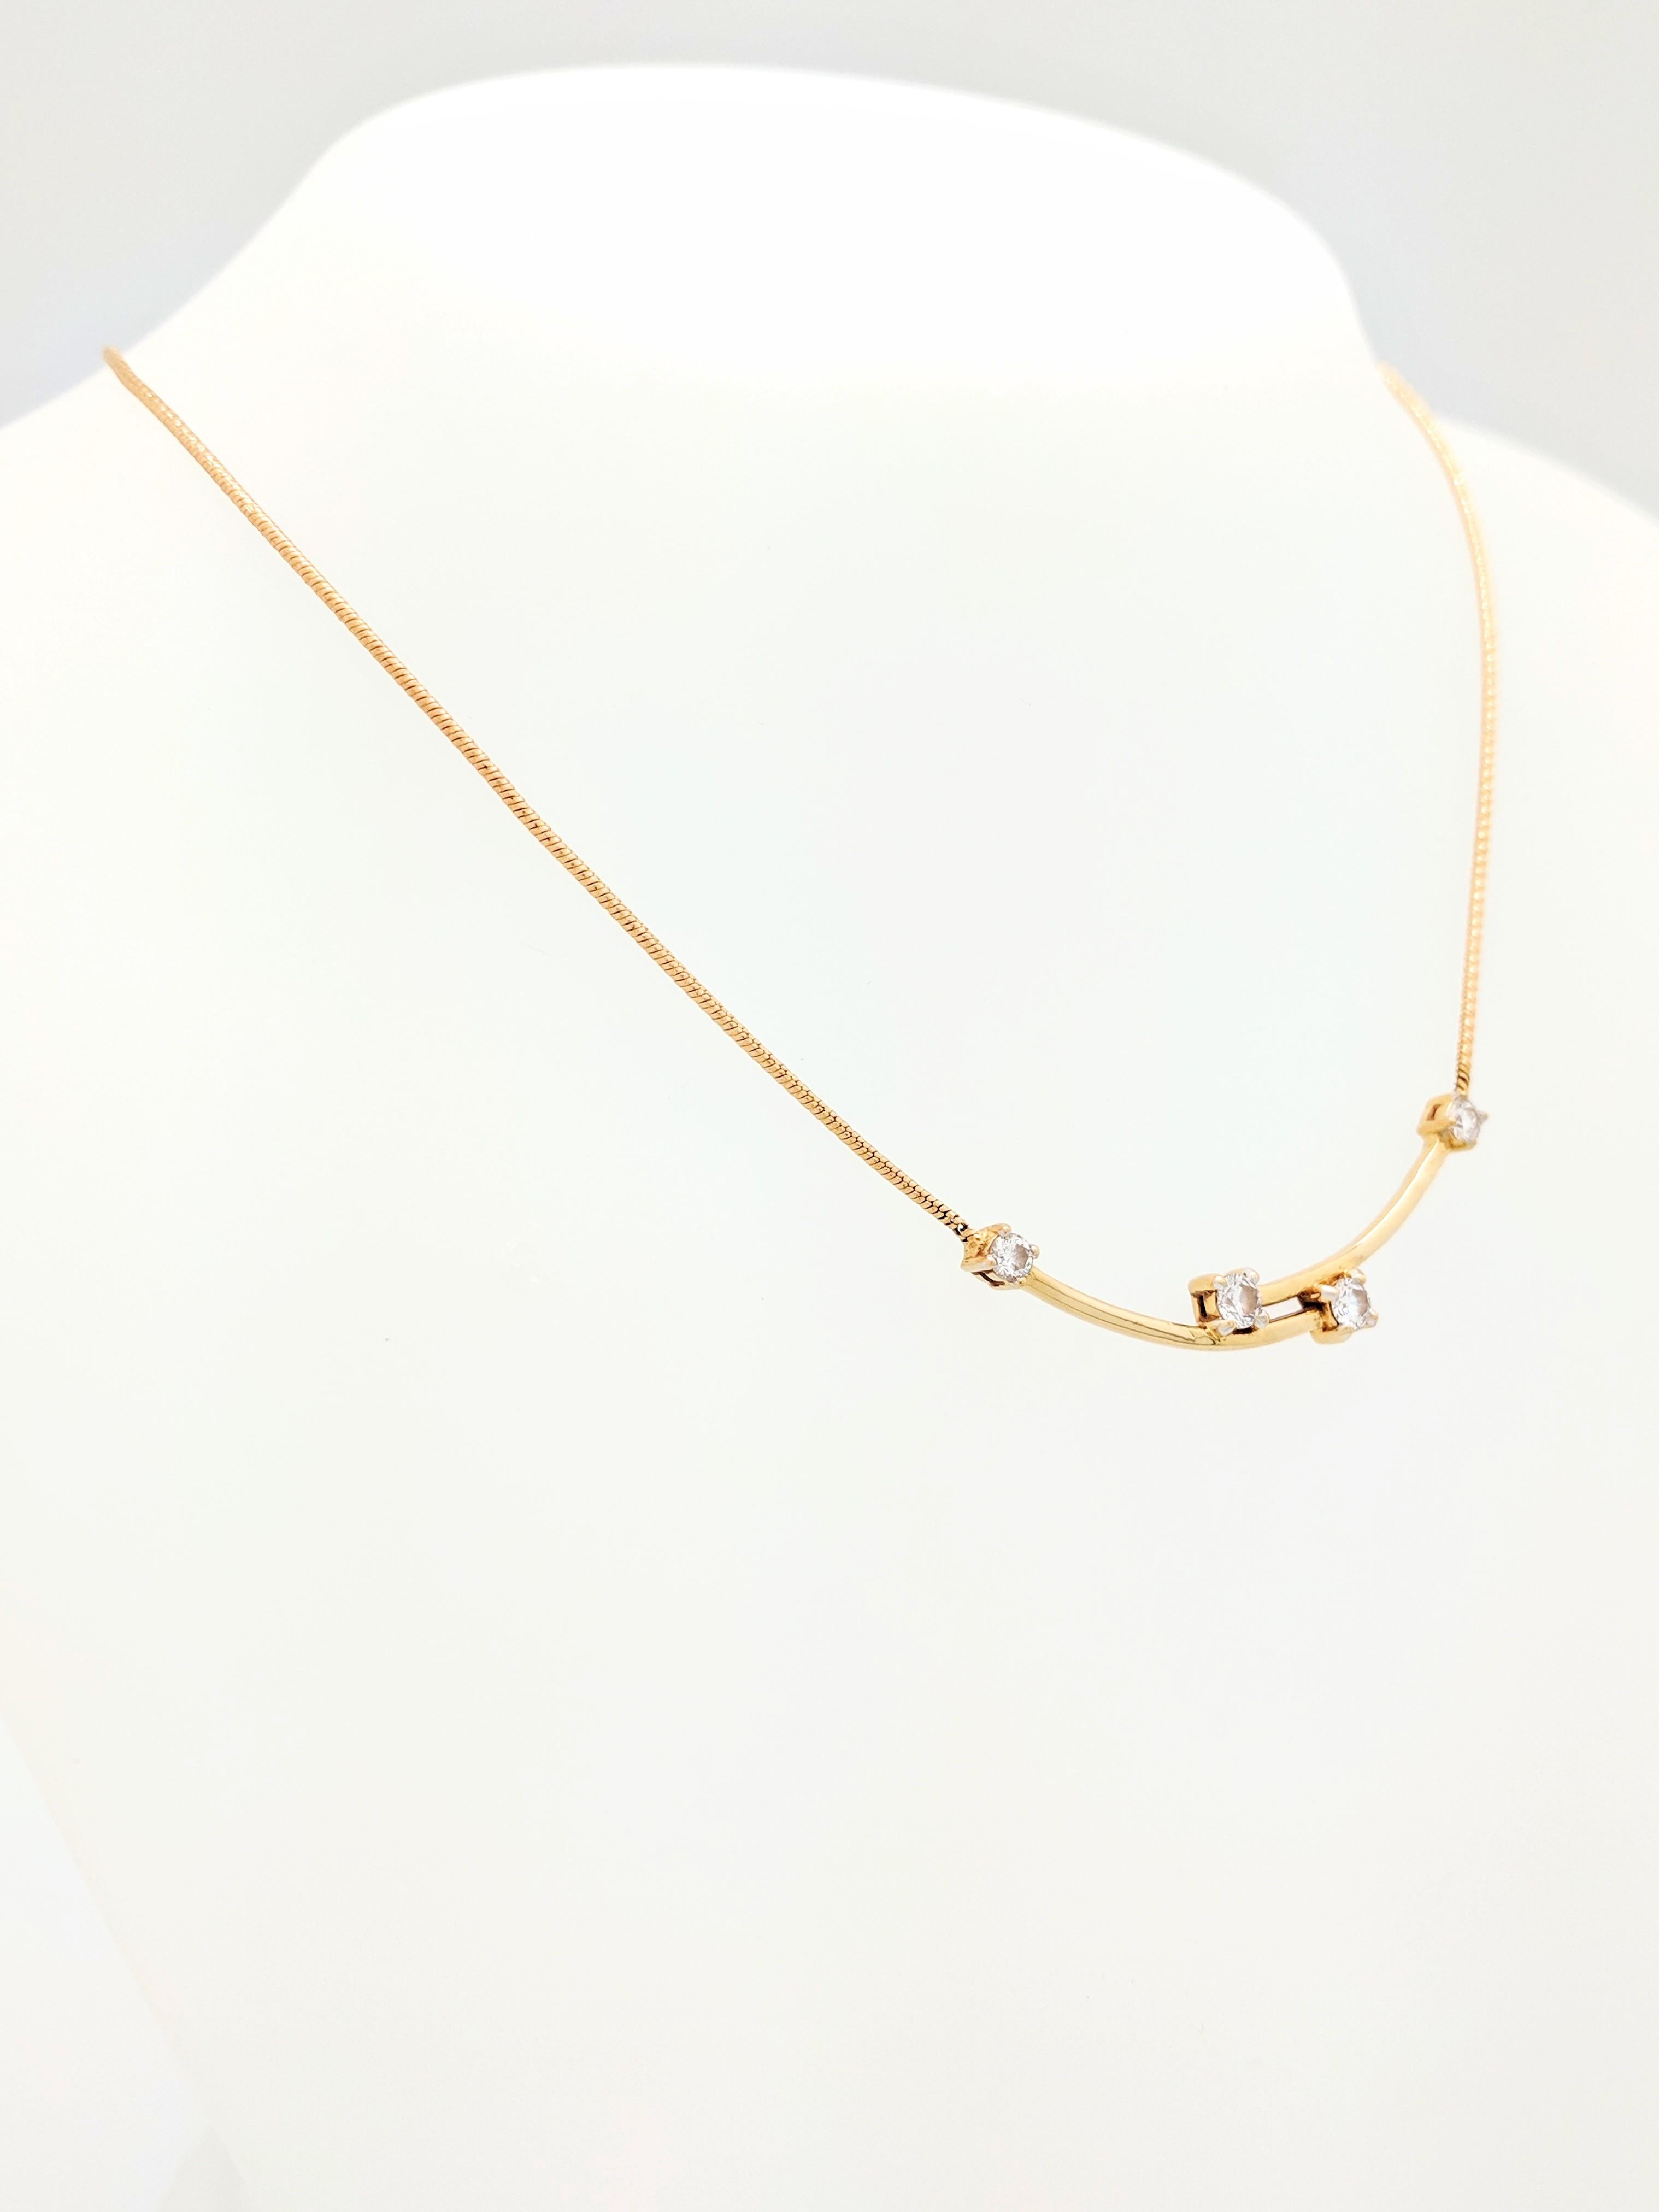 22k Yellow Gold Diamond Bar Necklace .50tcw SI1/H

You are viewing a stunning diamond bar necklace. This piece is crafted from 22k yellow gold and weighs 7.5 grams. It features (2) .15ct round brilliant cut diamonds and (2) .10ct round brilliant cut